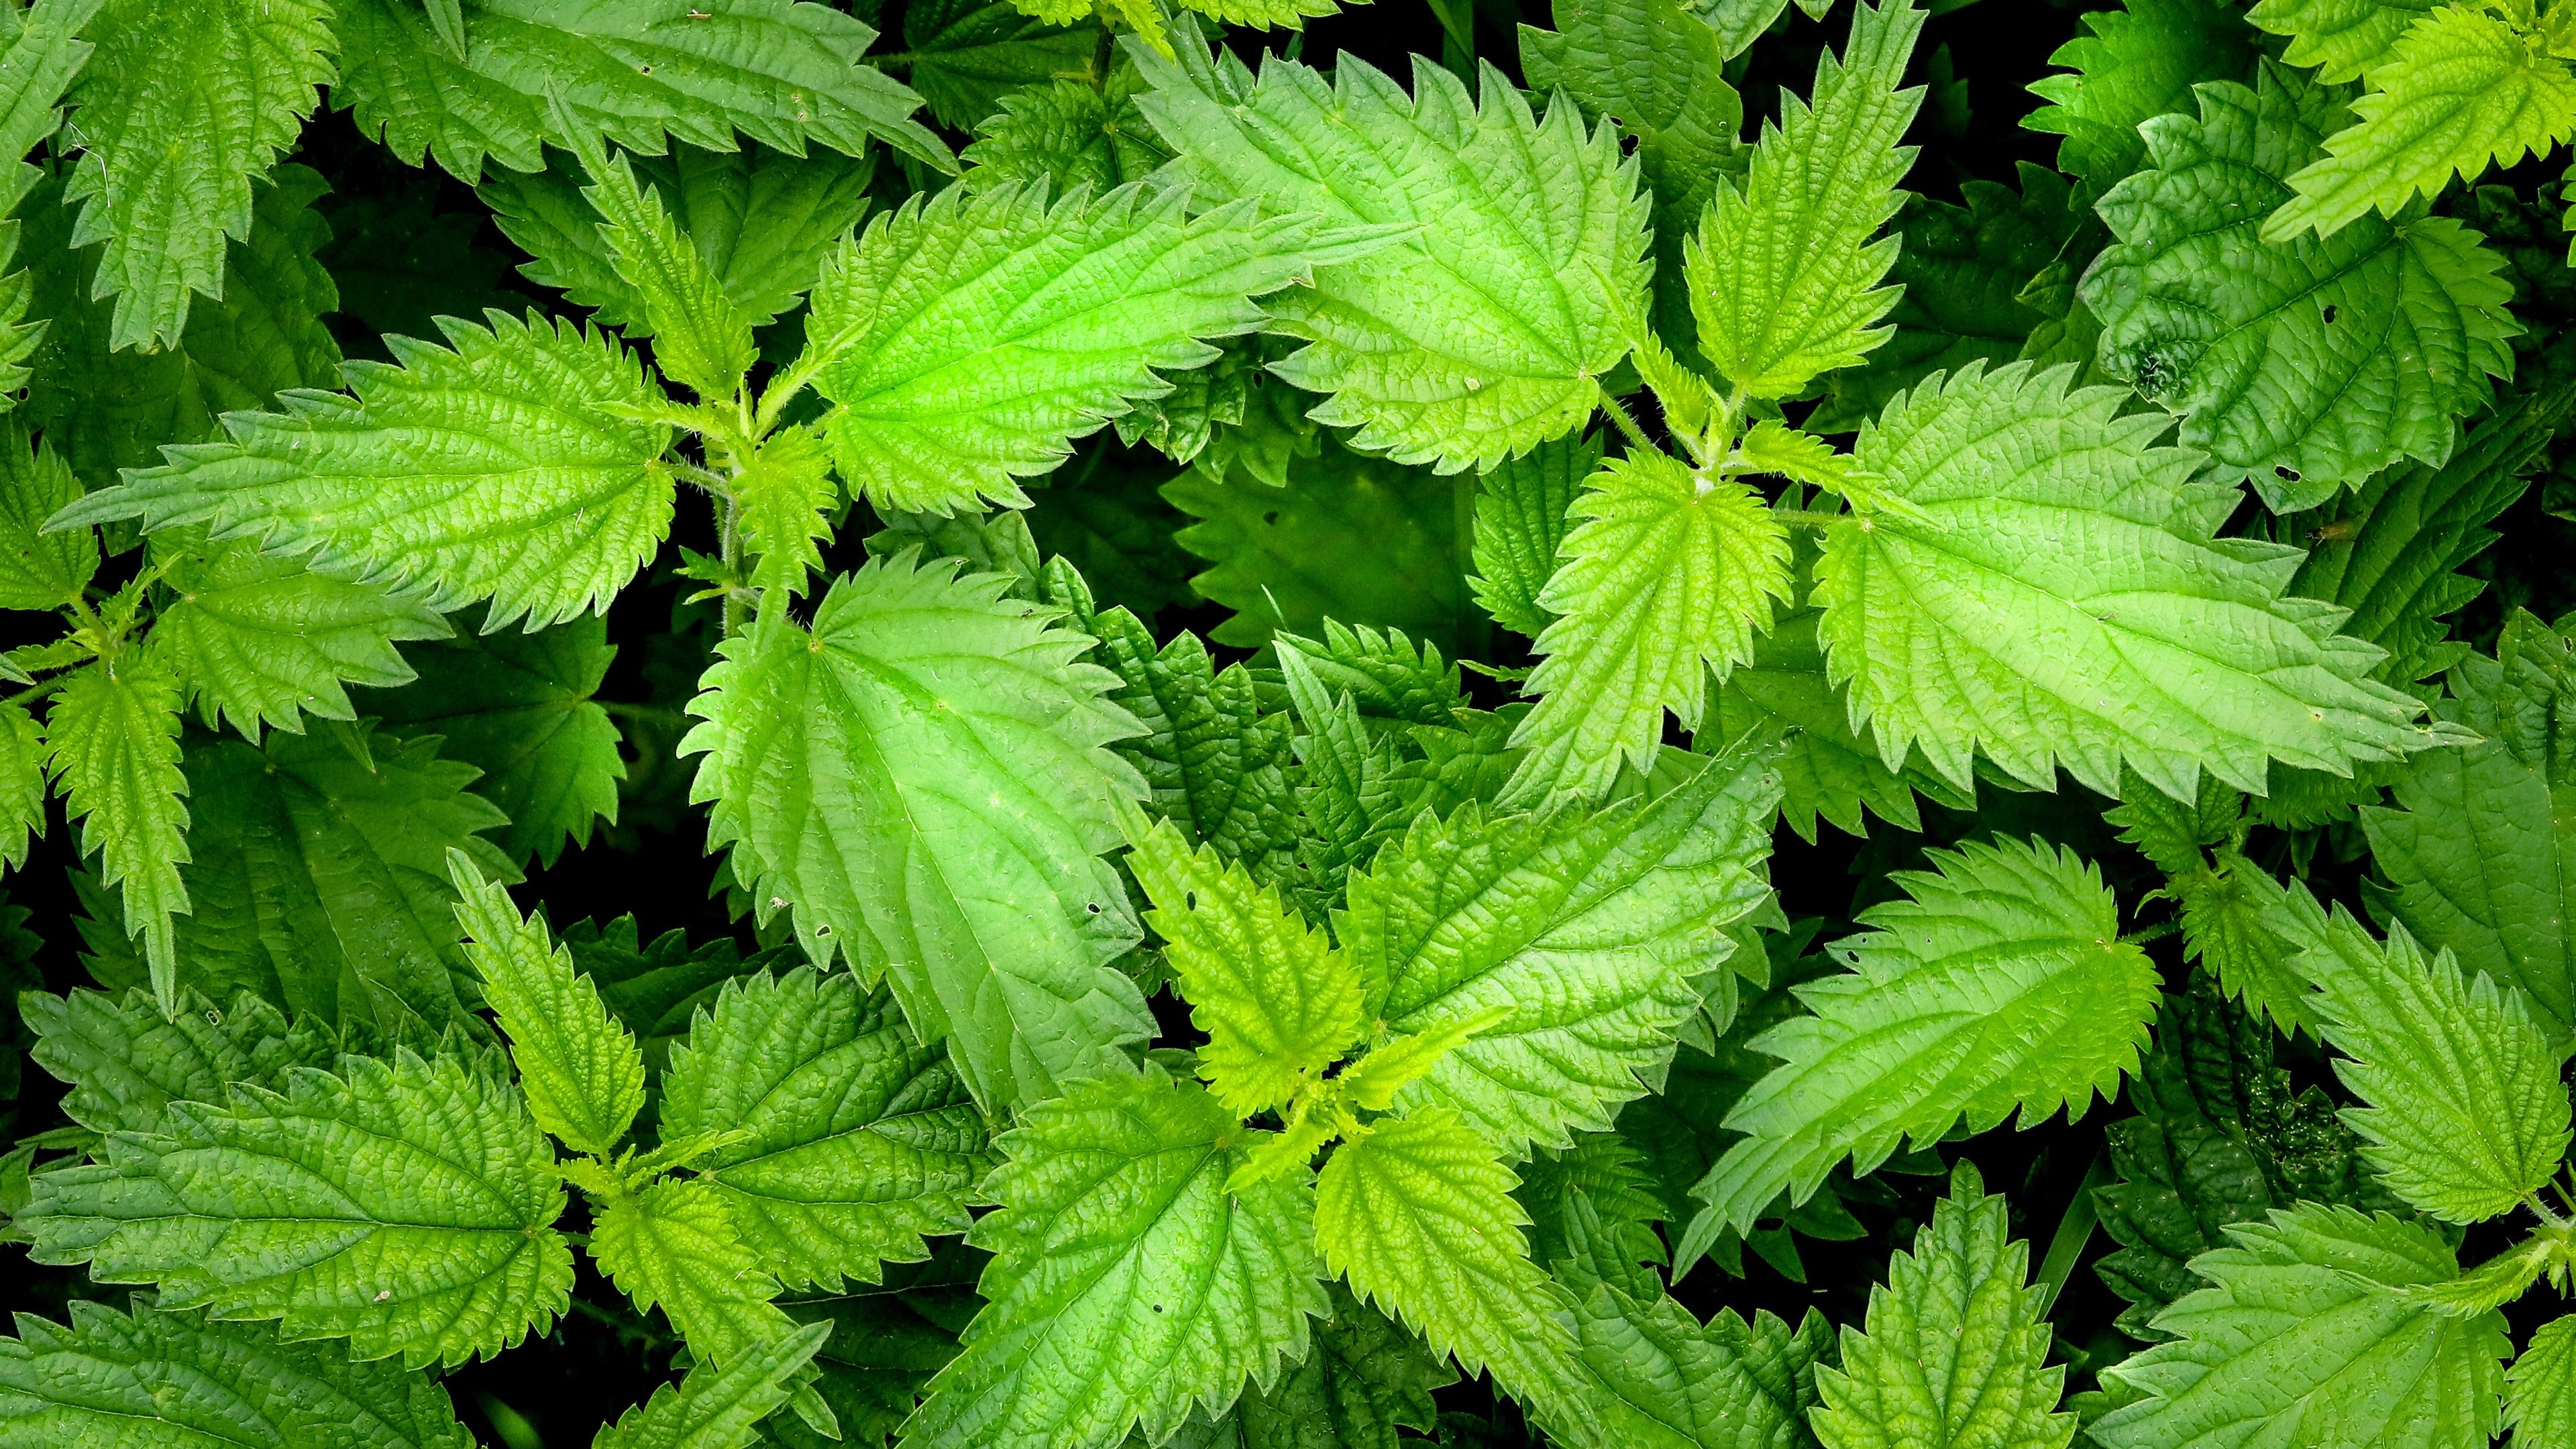 Wallpaper Mint, green leaves 3840x2160 UHD 4K Picture, Image